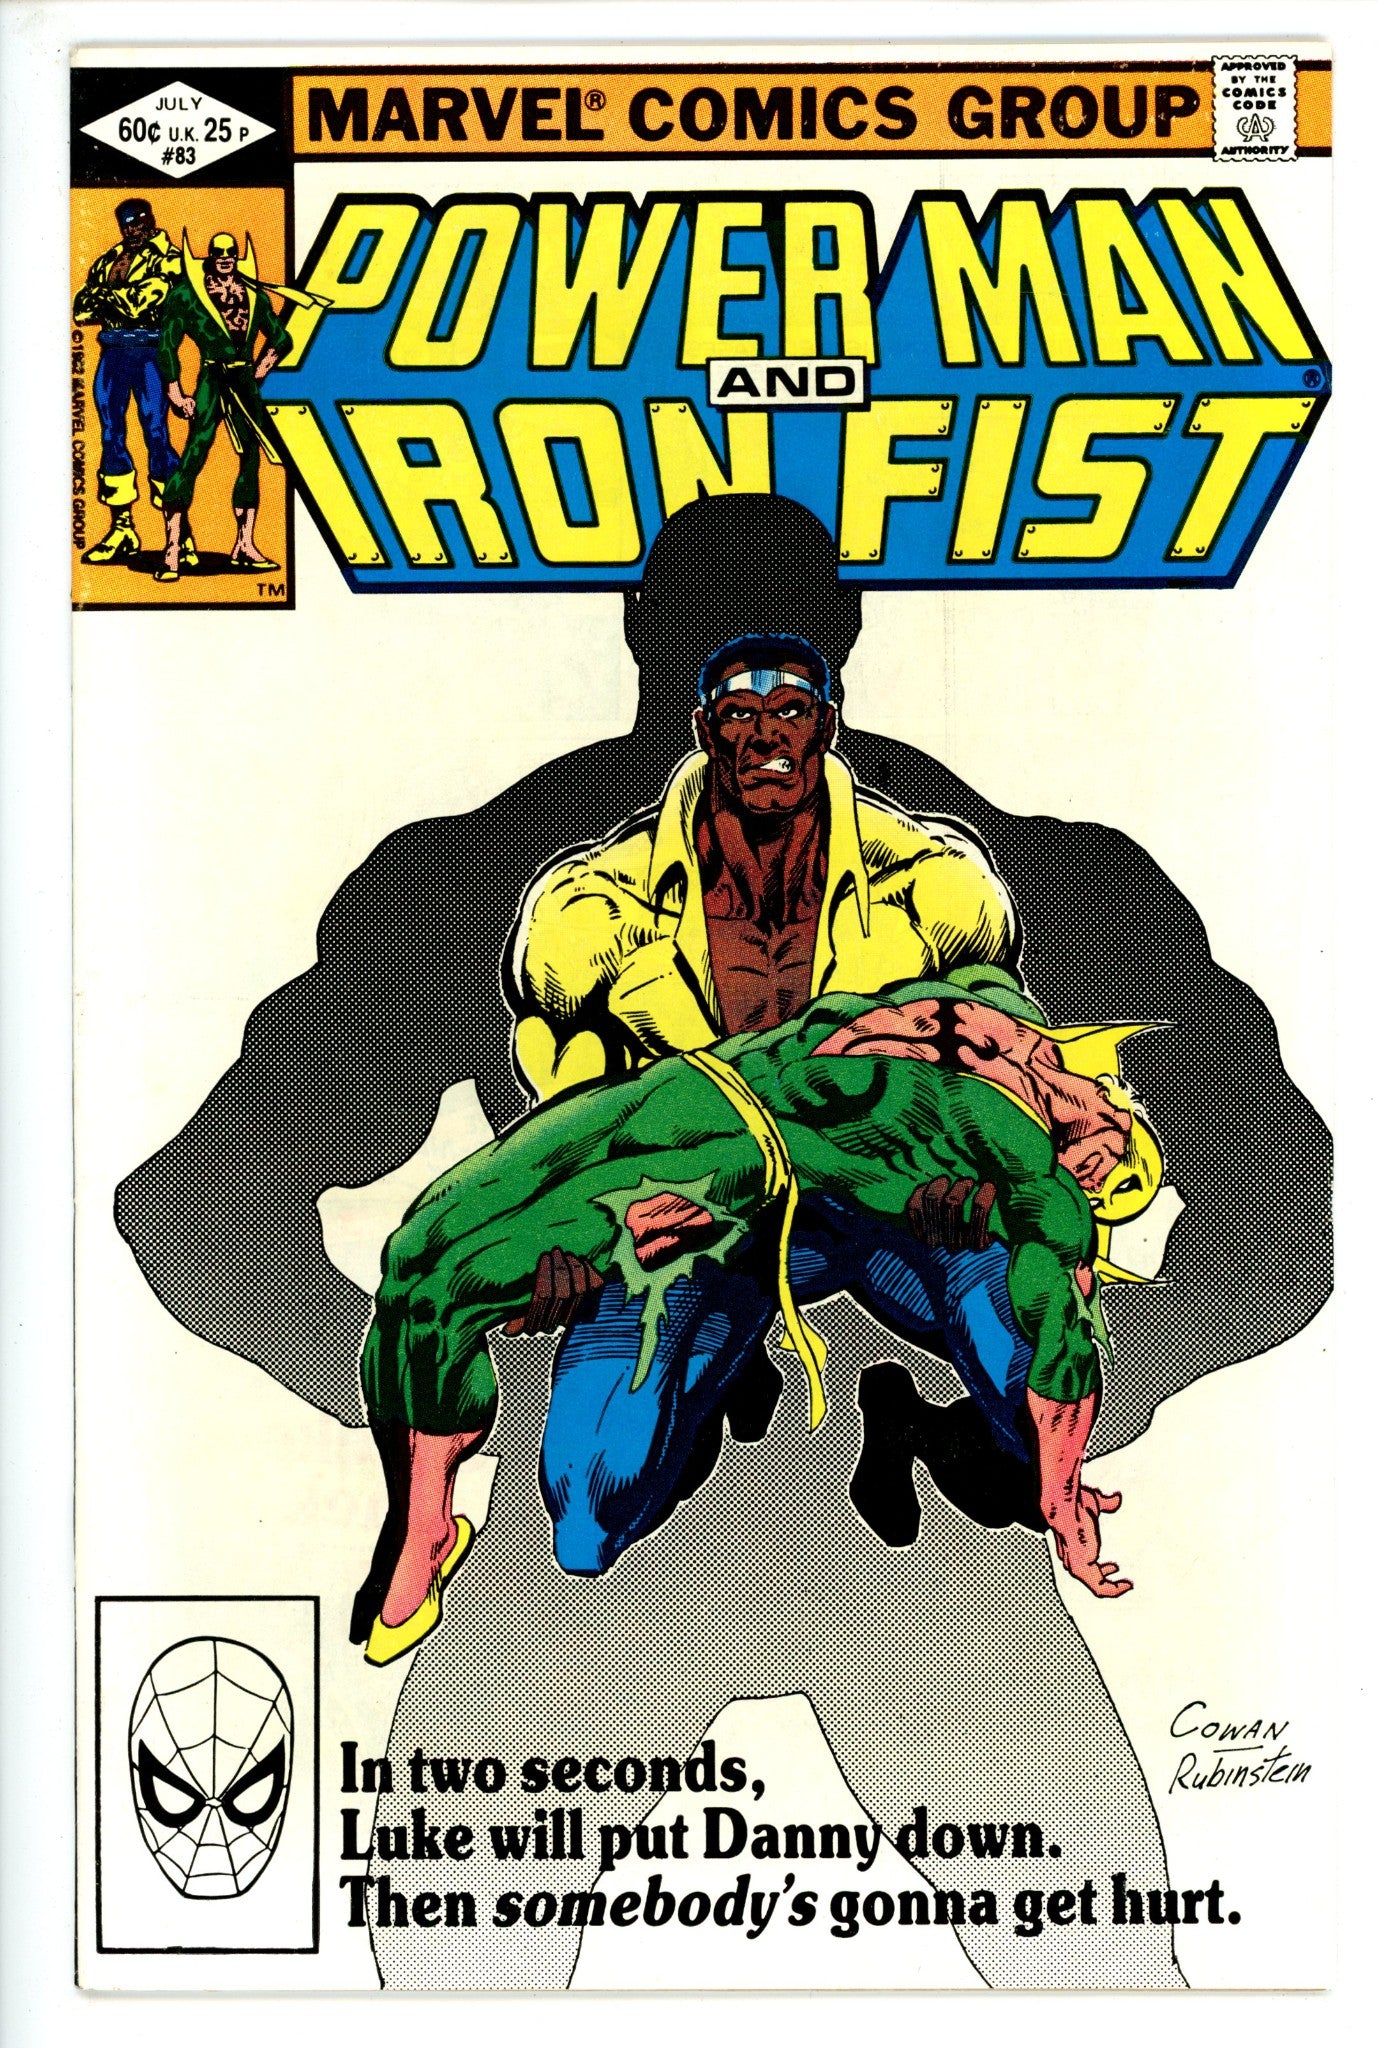 Power Man and Iron Fist Vol 1 83